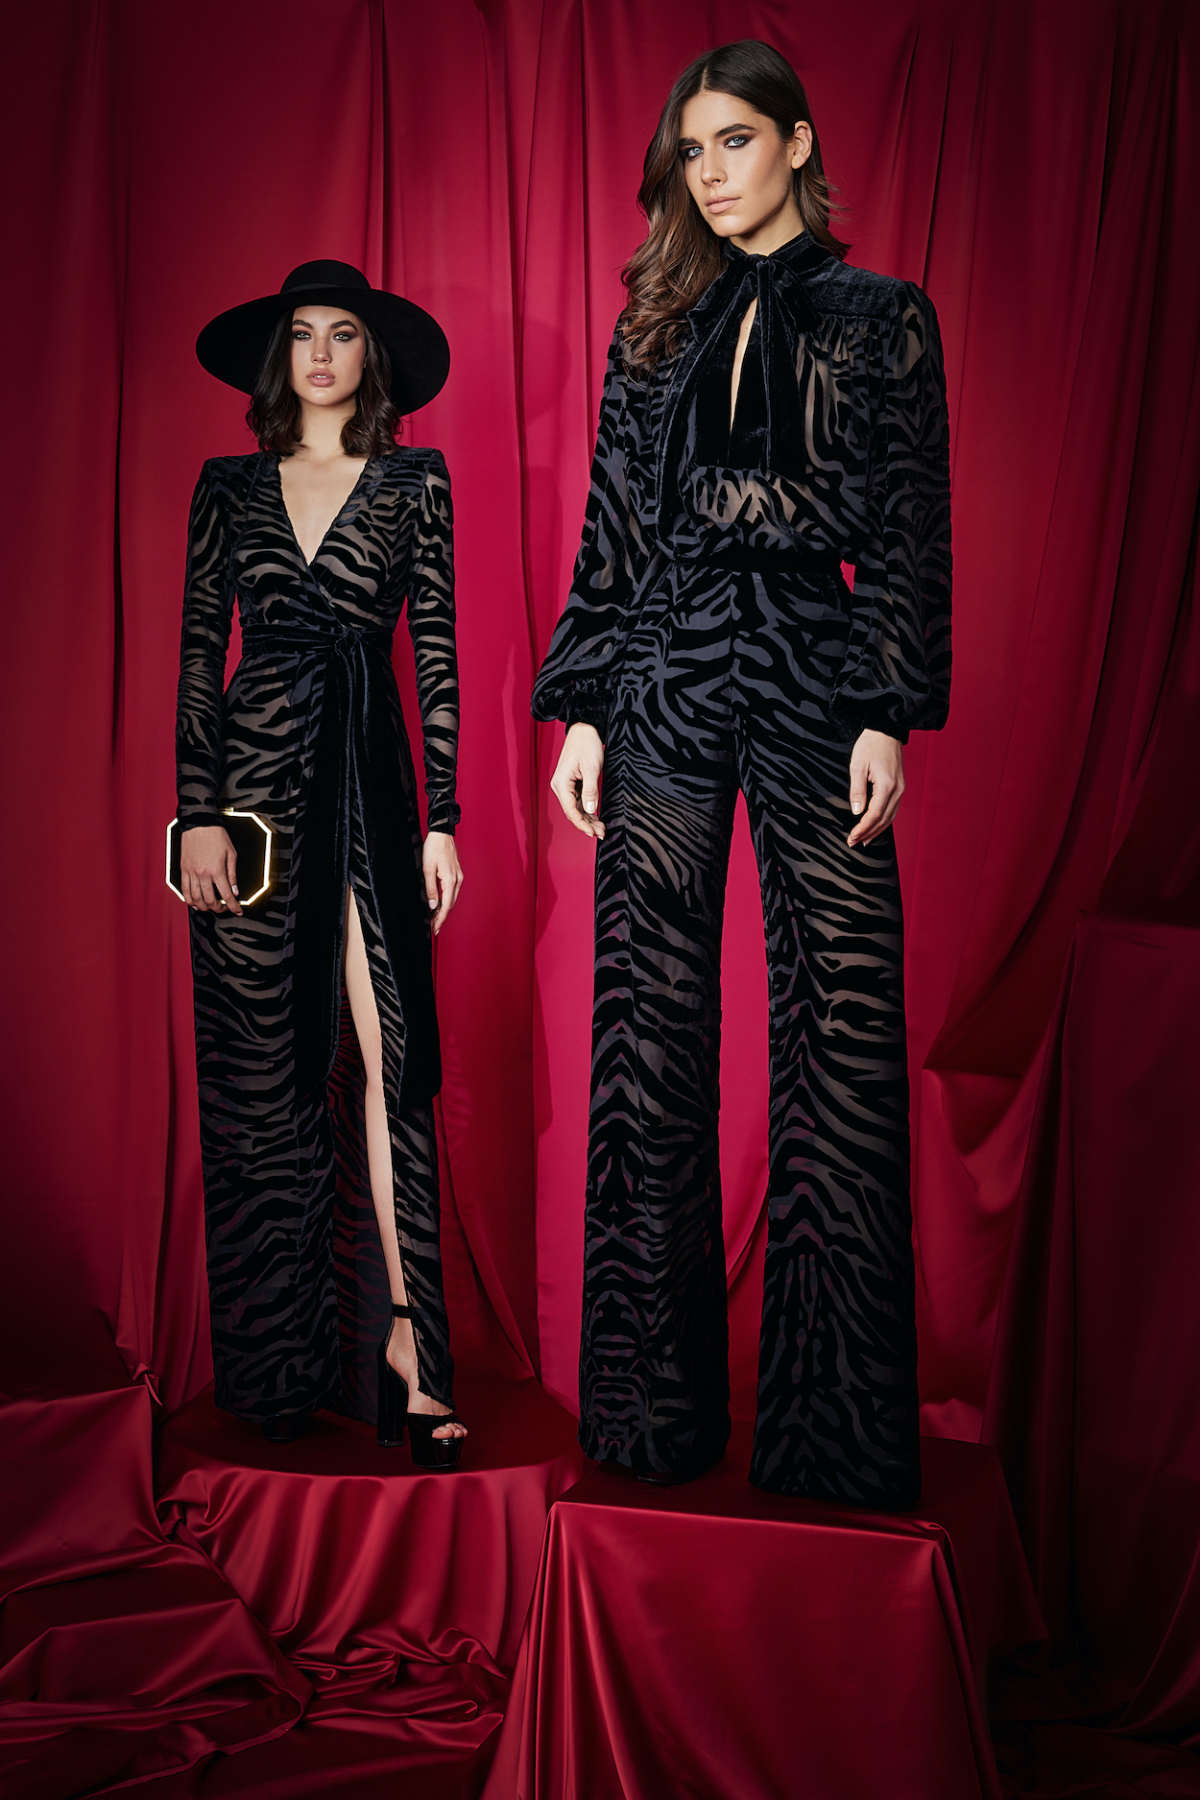 Zuhair Murad Presents His New Fall-Winter 2023/2024 Ready-To-Wear Collection: The Blissful Show